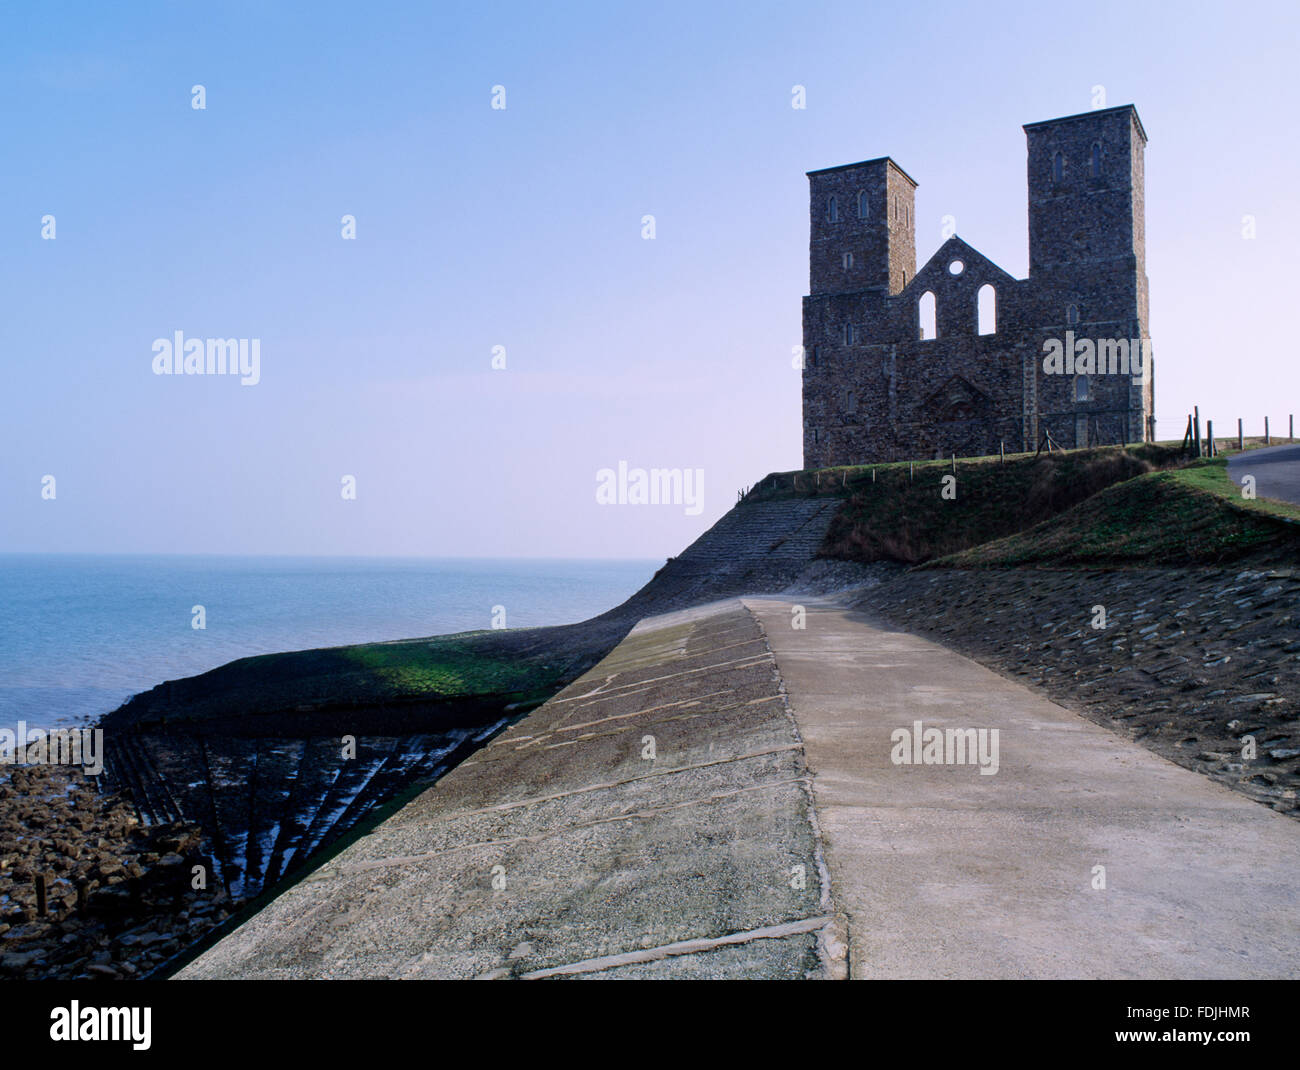 St Mary's Church, Reculver. The twin towers of the west front of the Norman church built within the Roman fort seen from the sea defences. Stock Photo